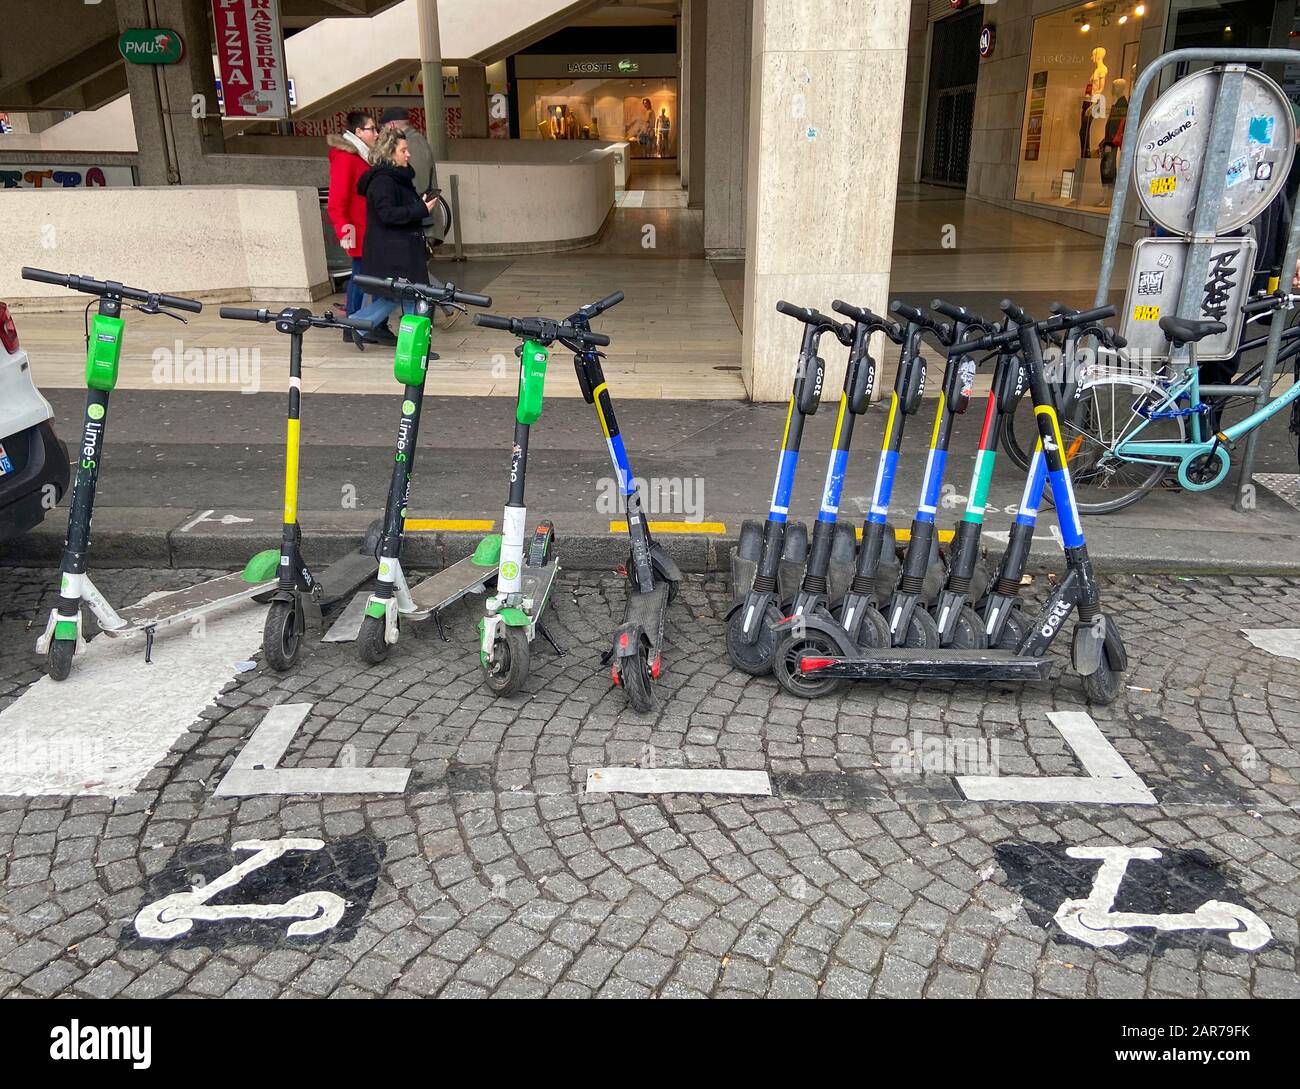 PARKING SPOT IN PARIS FOR ELECTRIC SCOOTERS Stock Photo